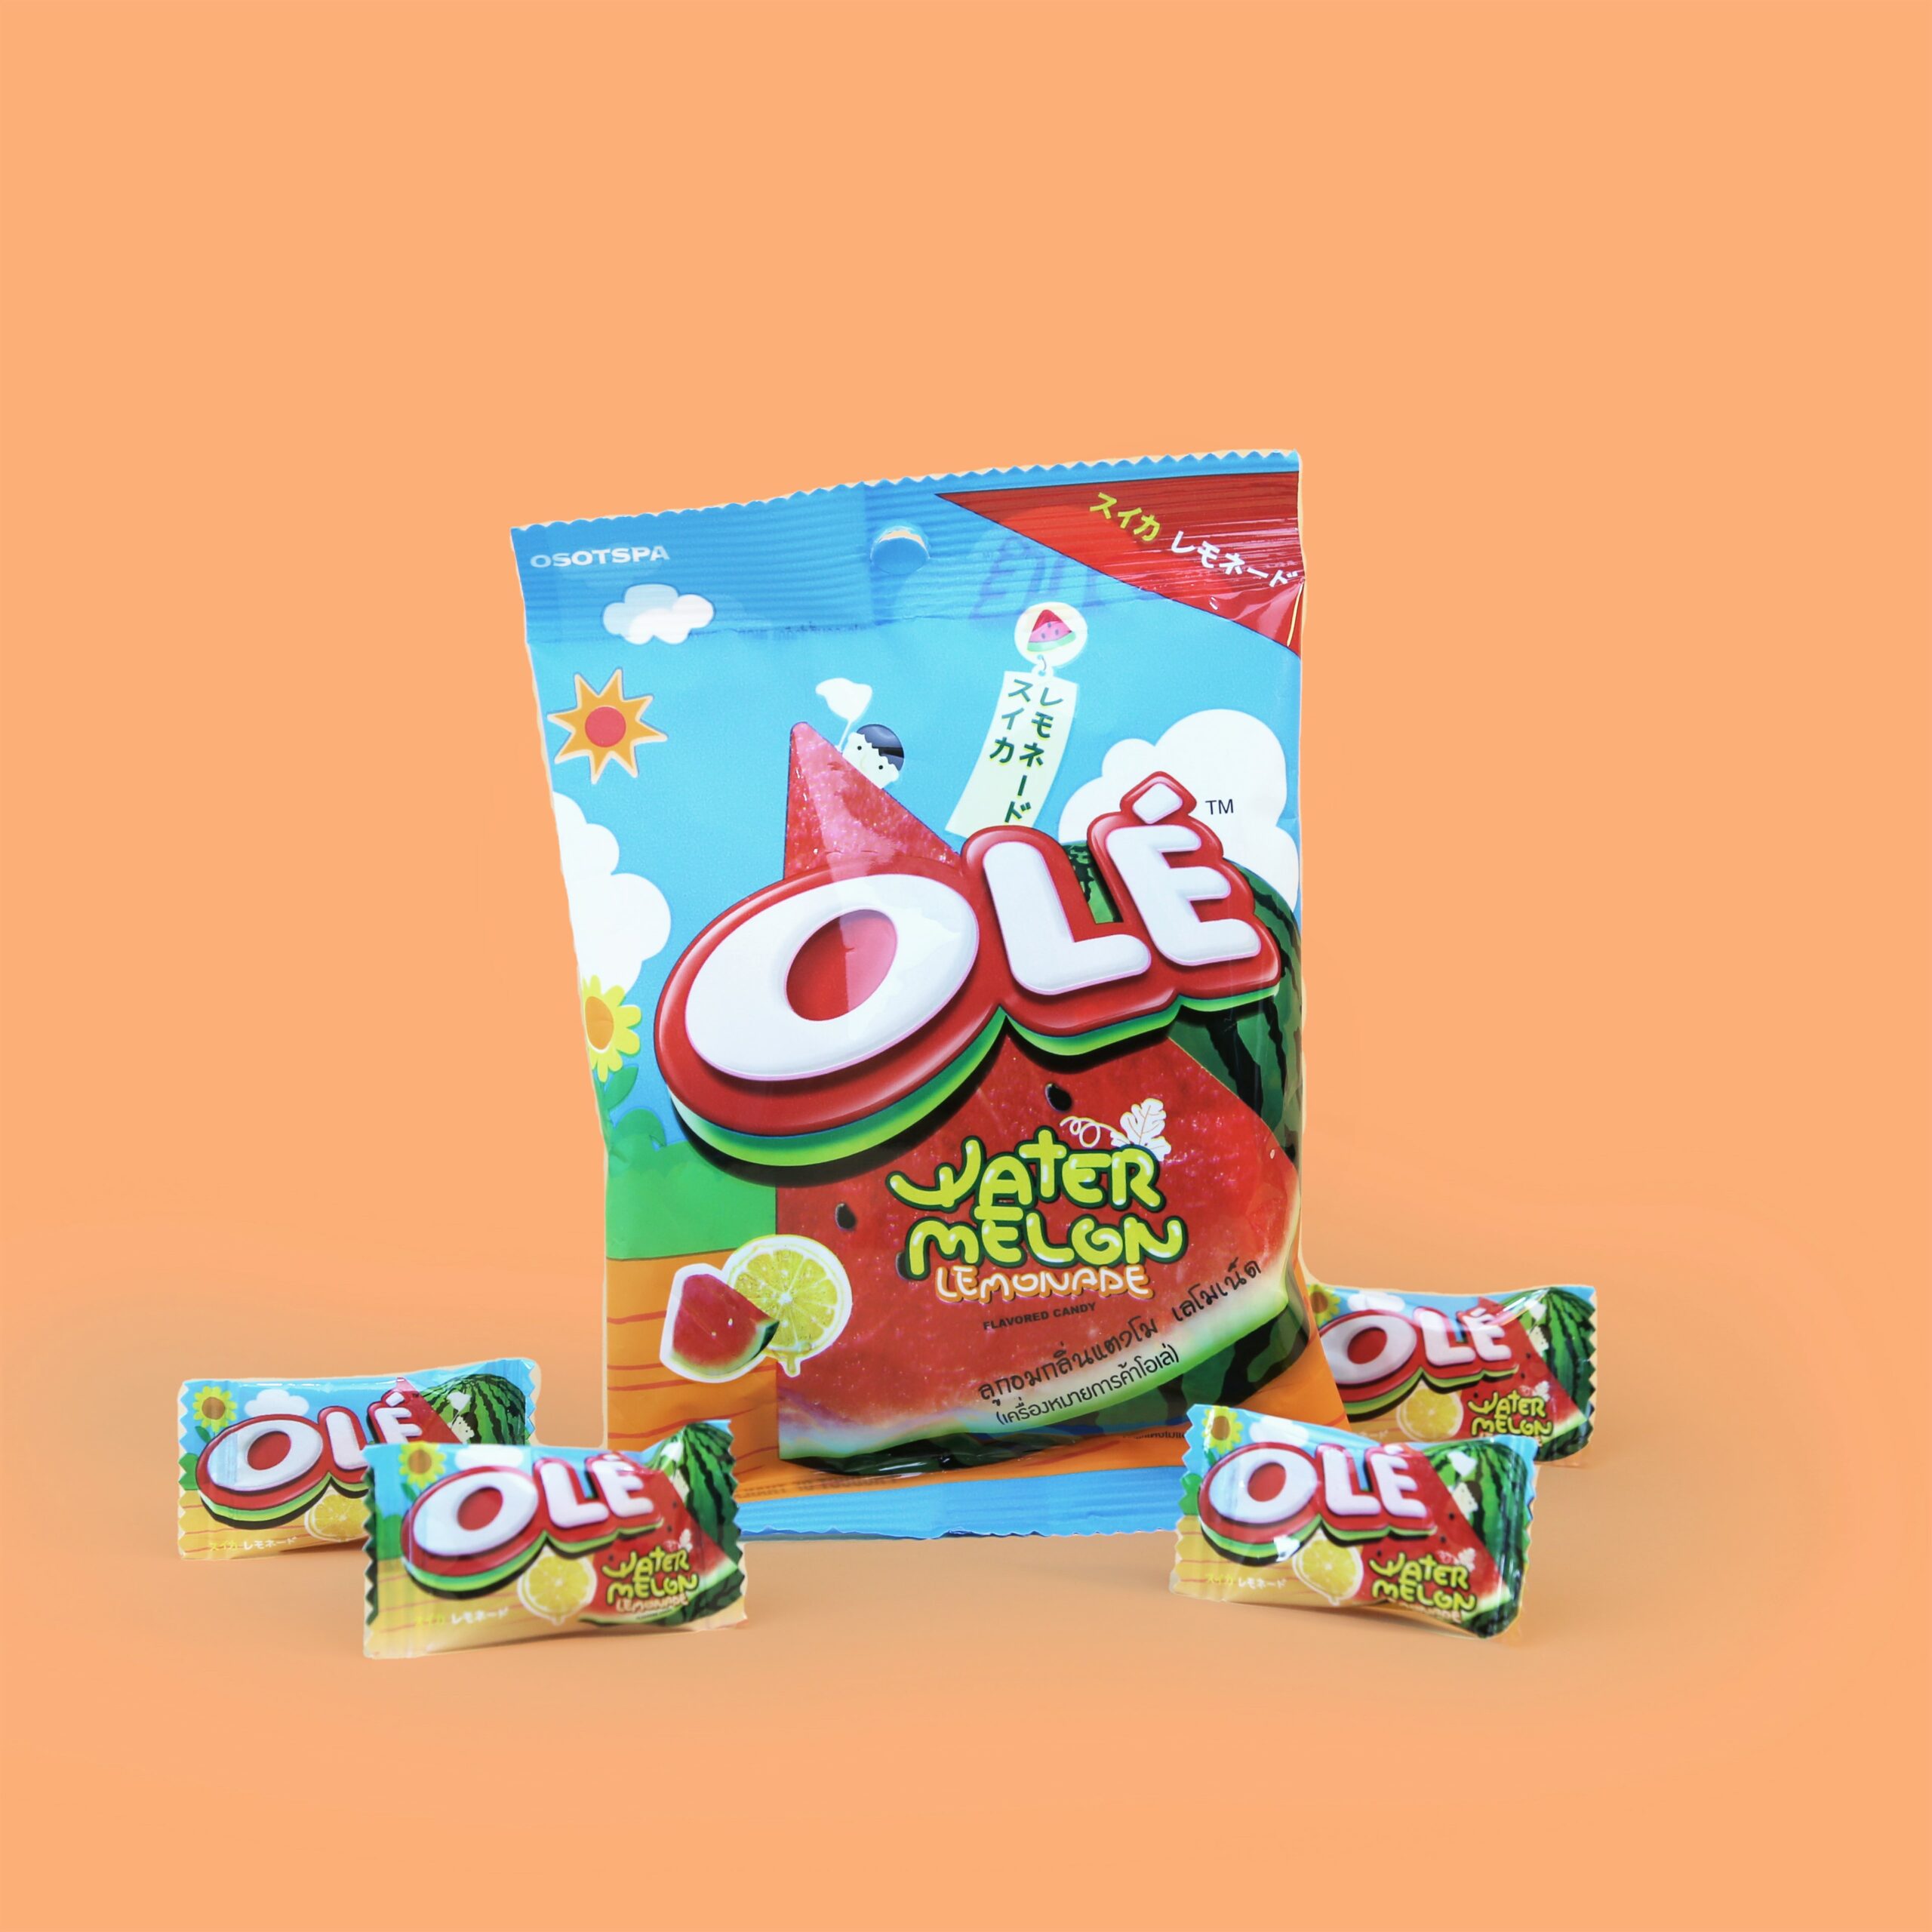 OLE watermelon and lemonade flavored Thai candy. Osotspa brand Thai snack in Heap Brand's Thai snack subscription box